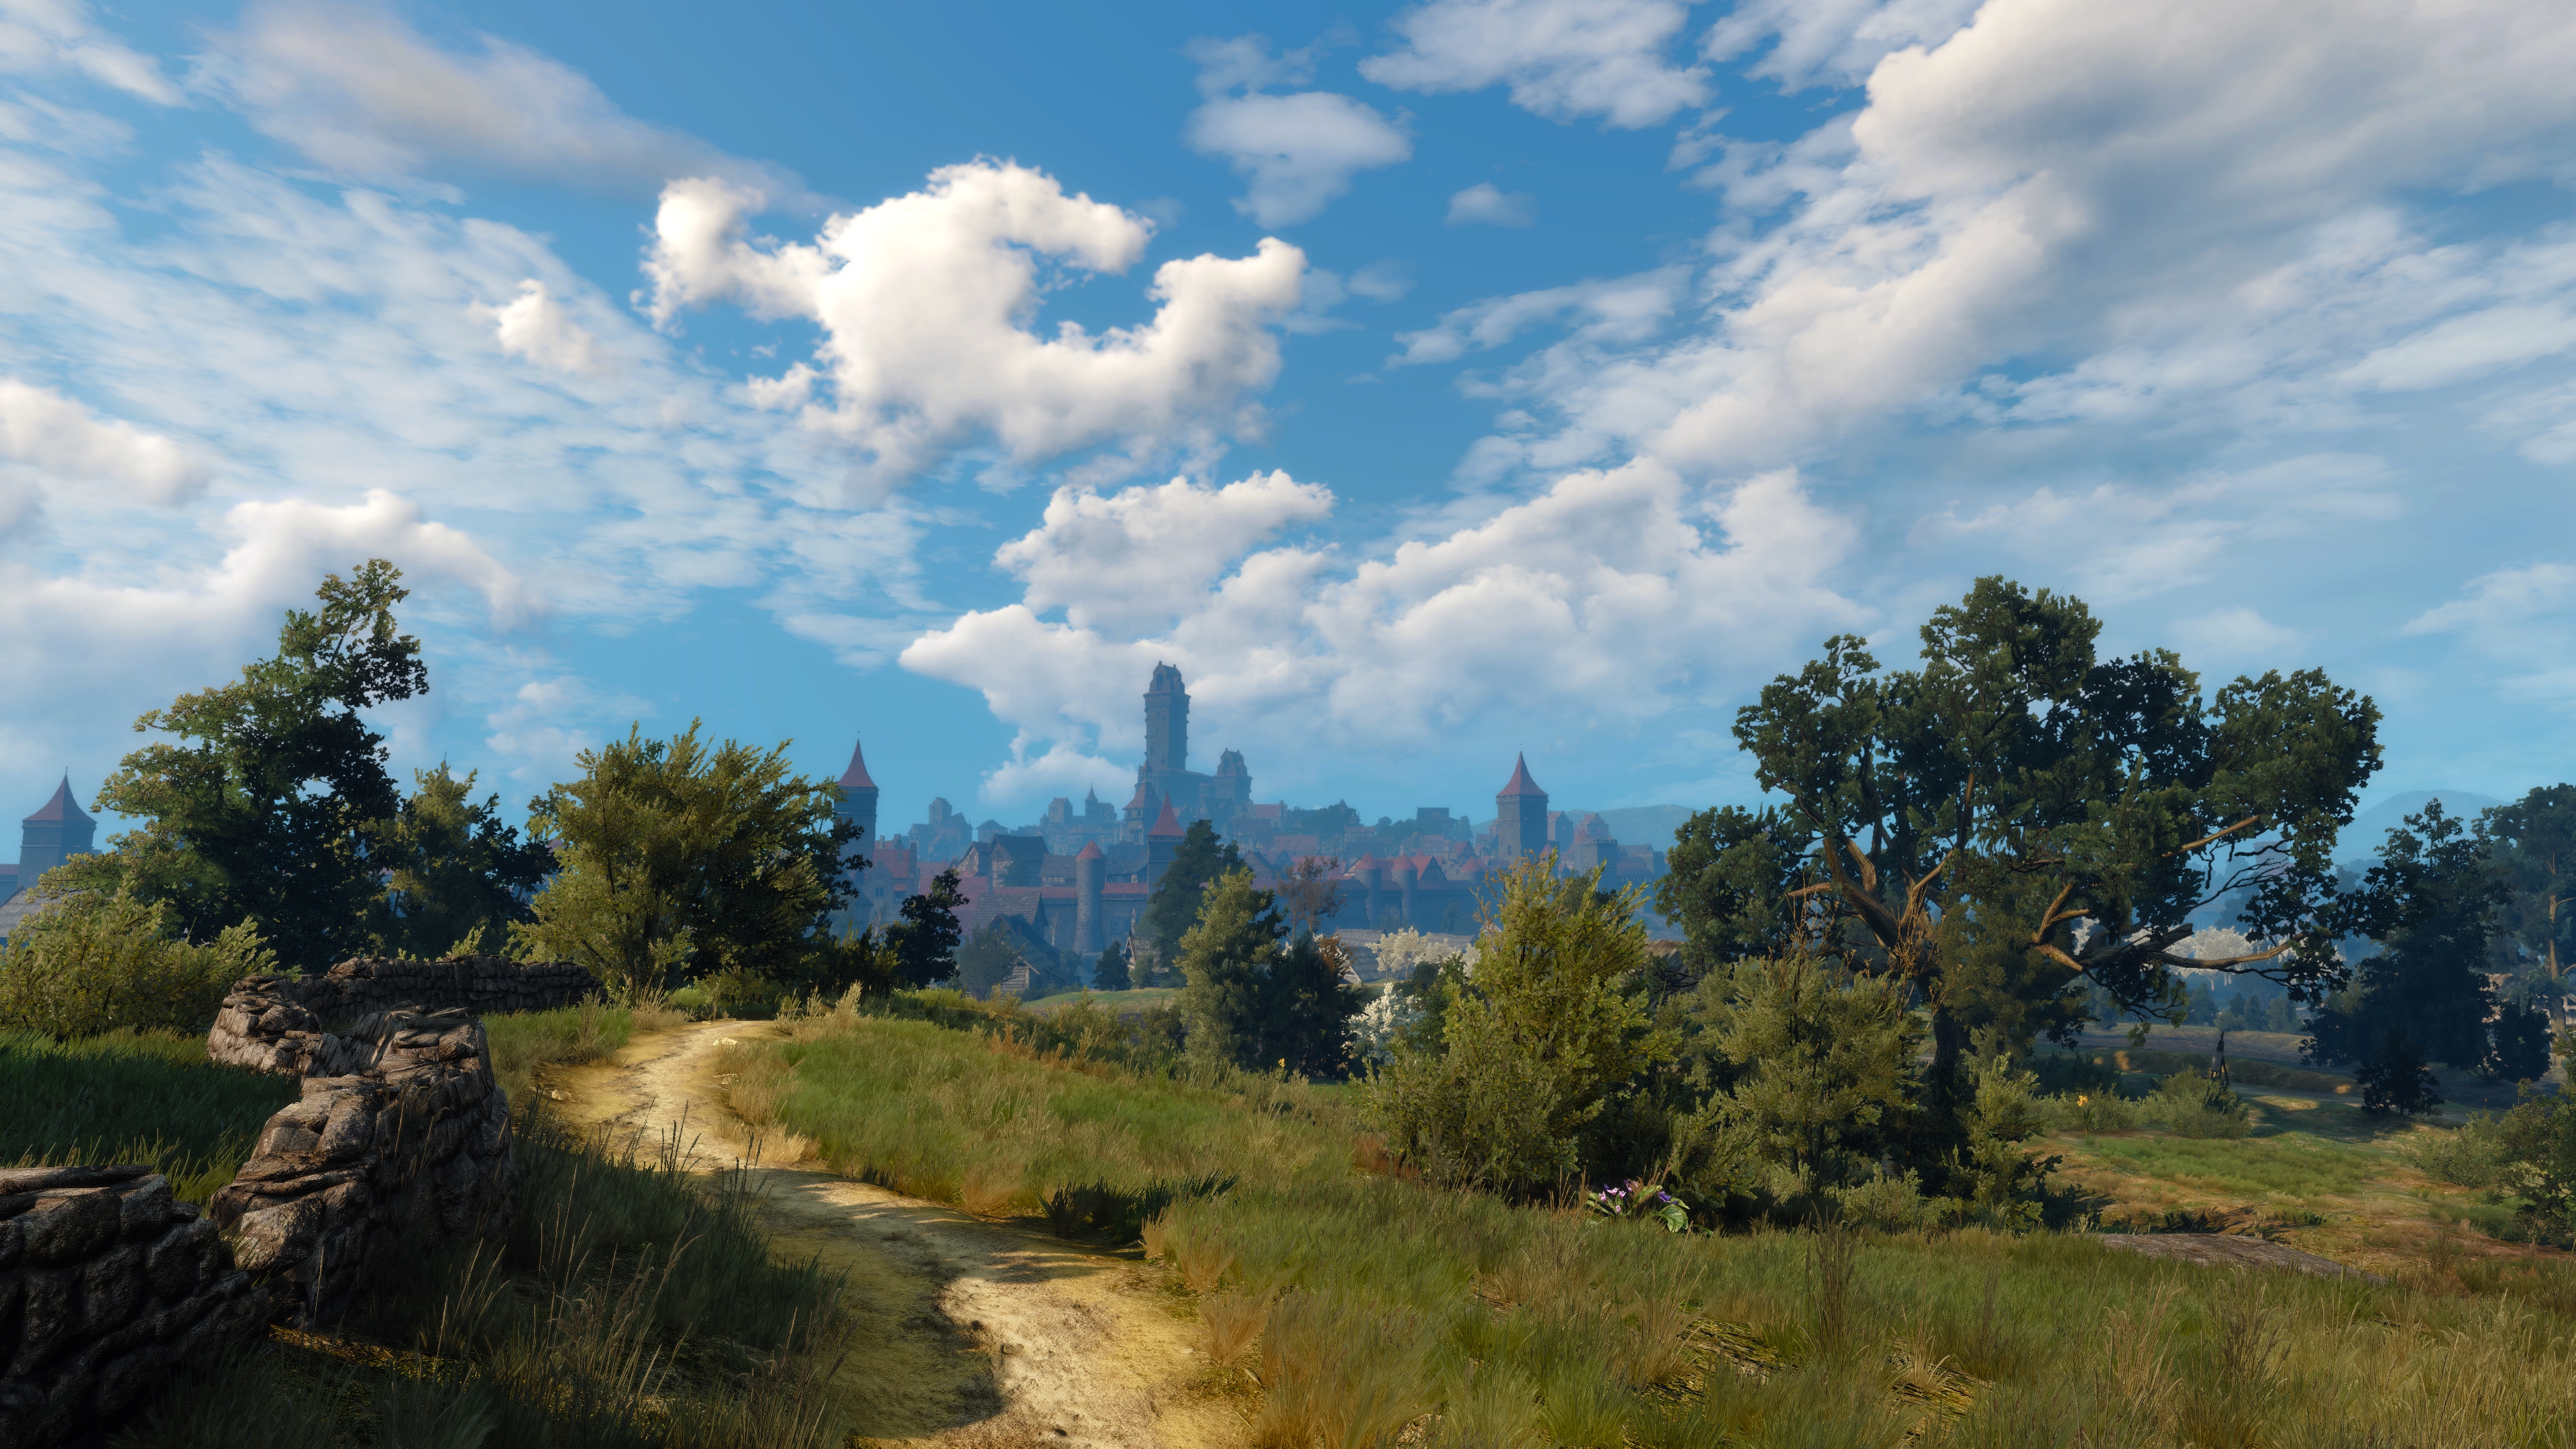 General 3840x2160 The Witcher 3: Wild Hunt PC gaming screen shot Novigrad landscape road trees clouds path video game art sky grass sunlight video games